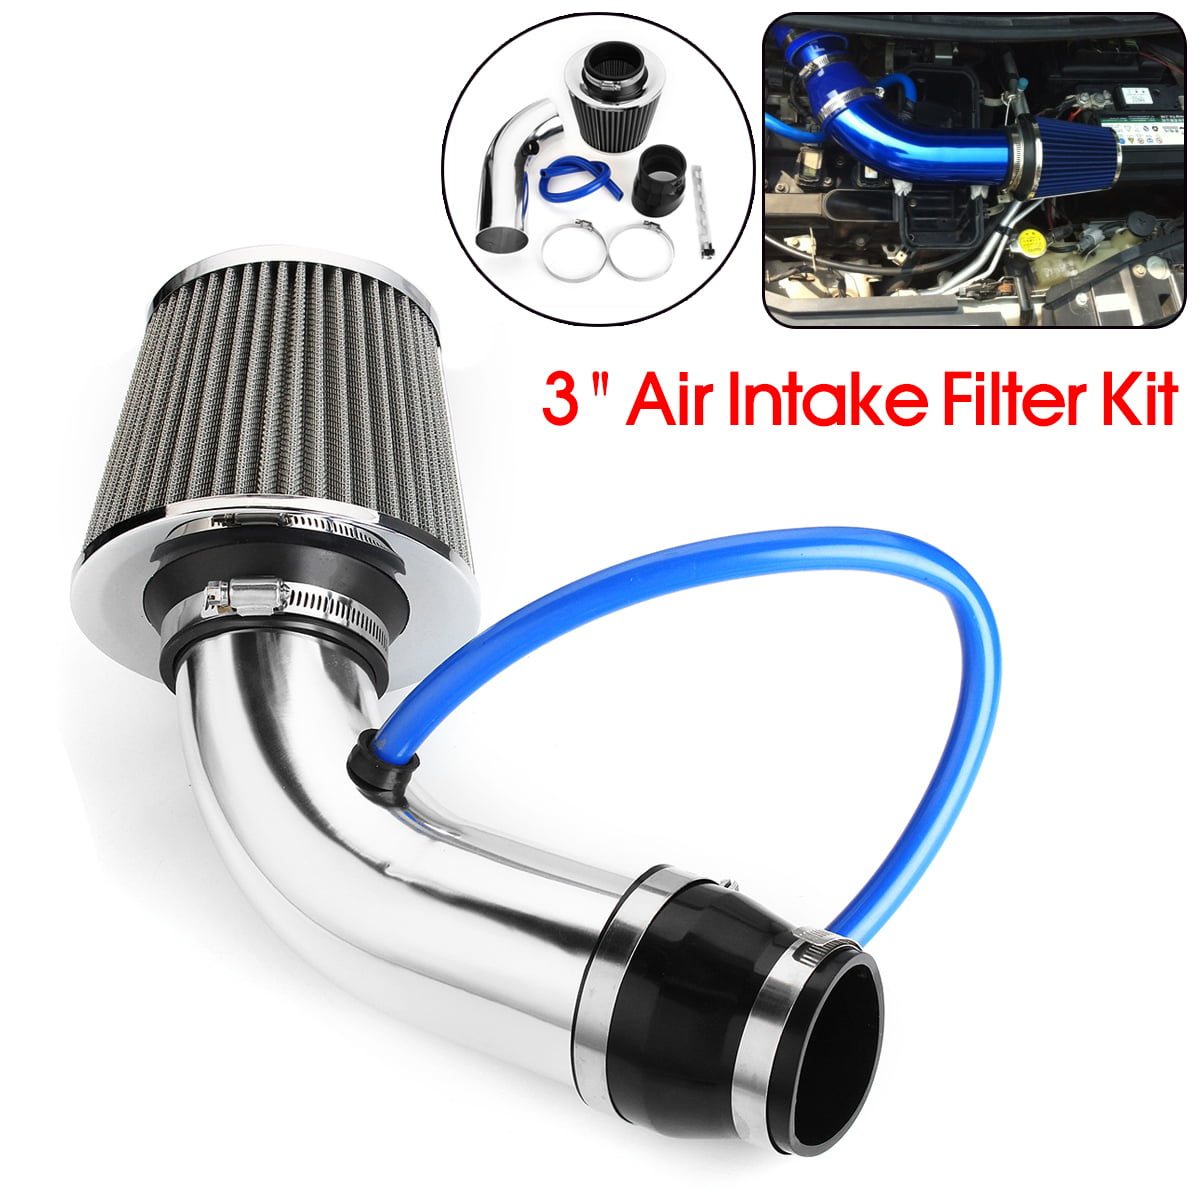 New high-quality Universal Car Air Filter Induction Car Kit Cone Chrome Finish